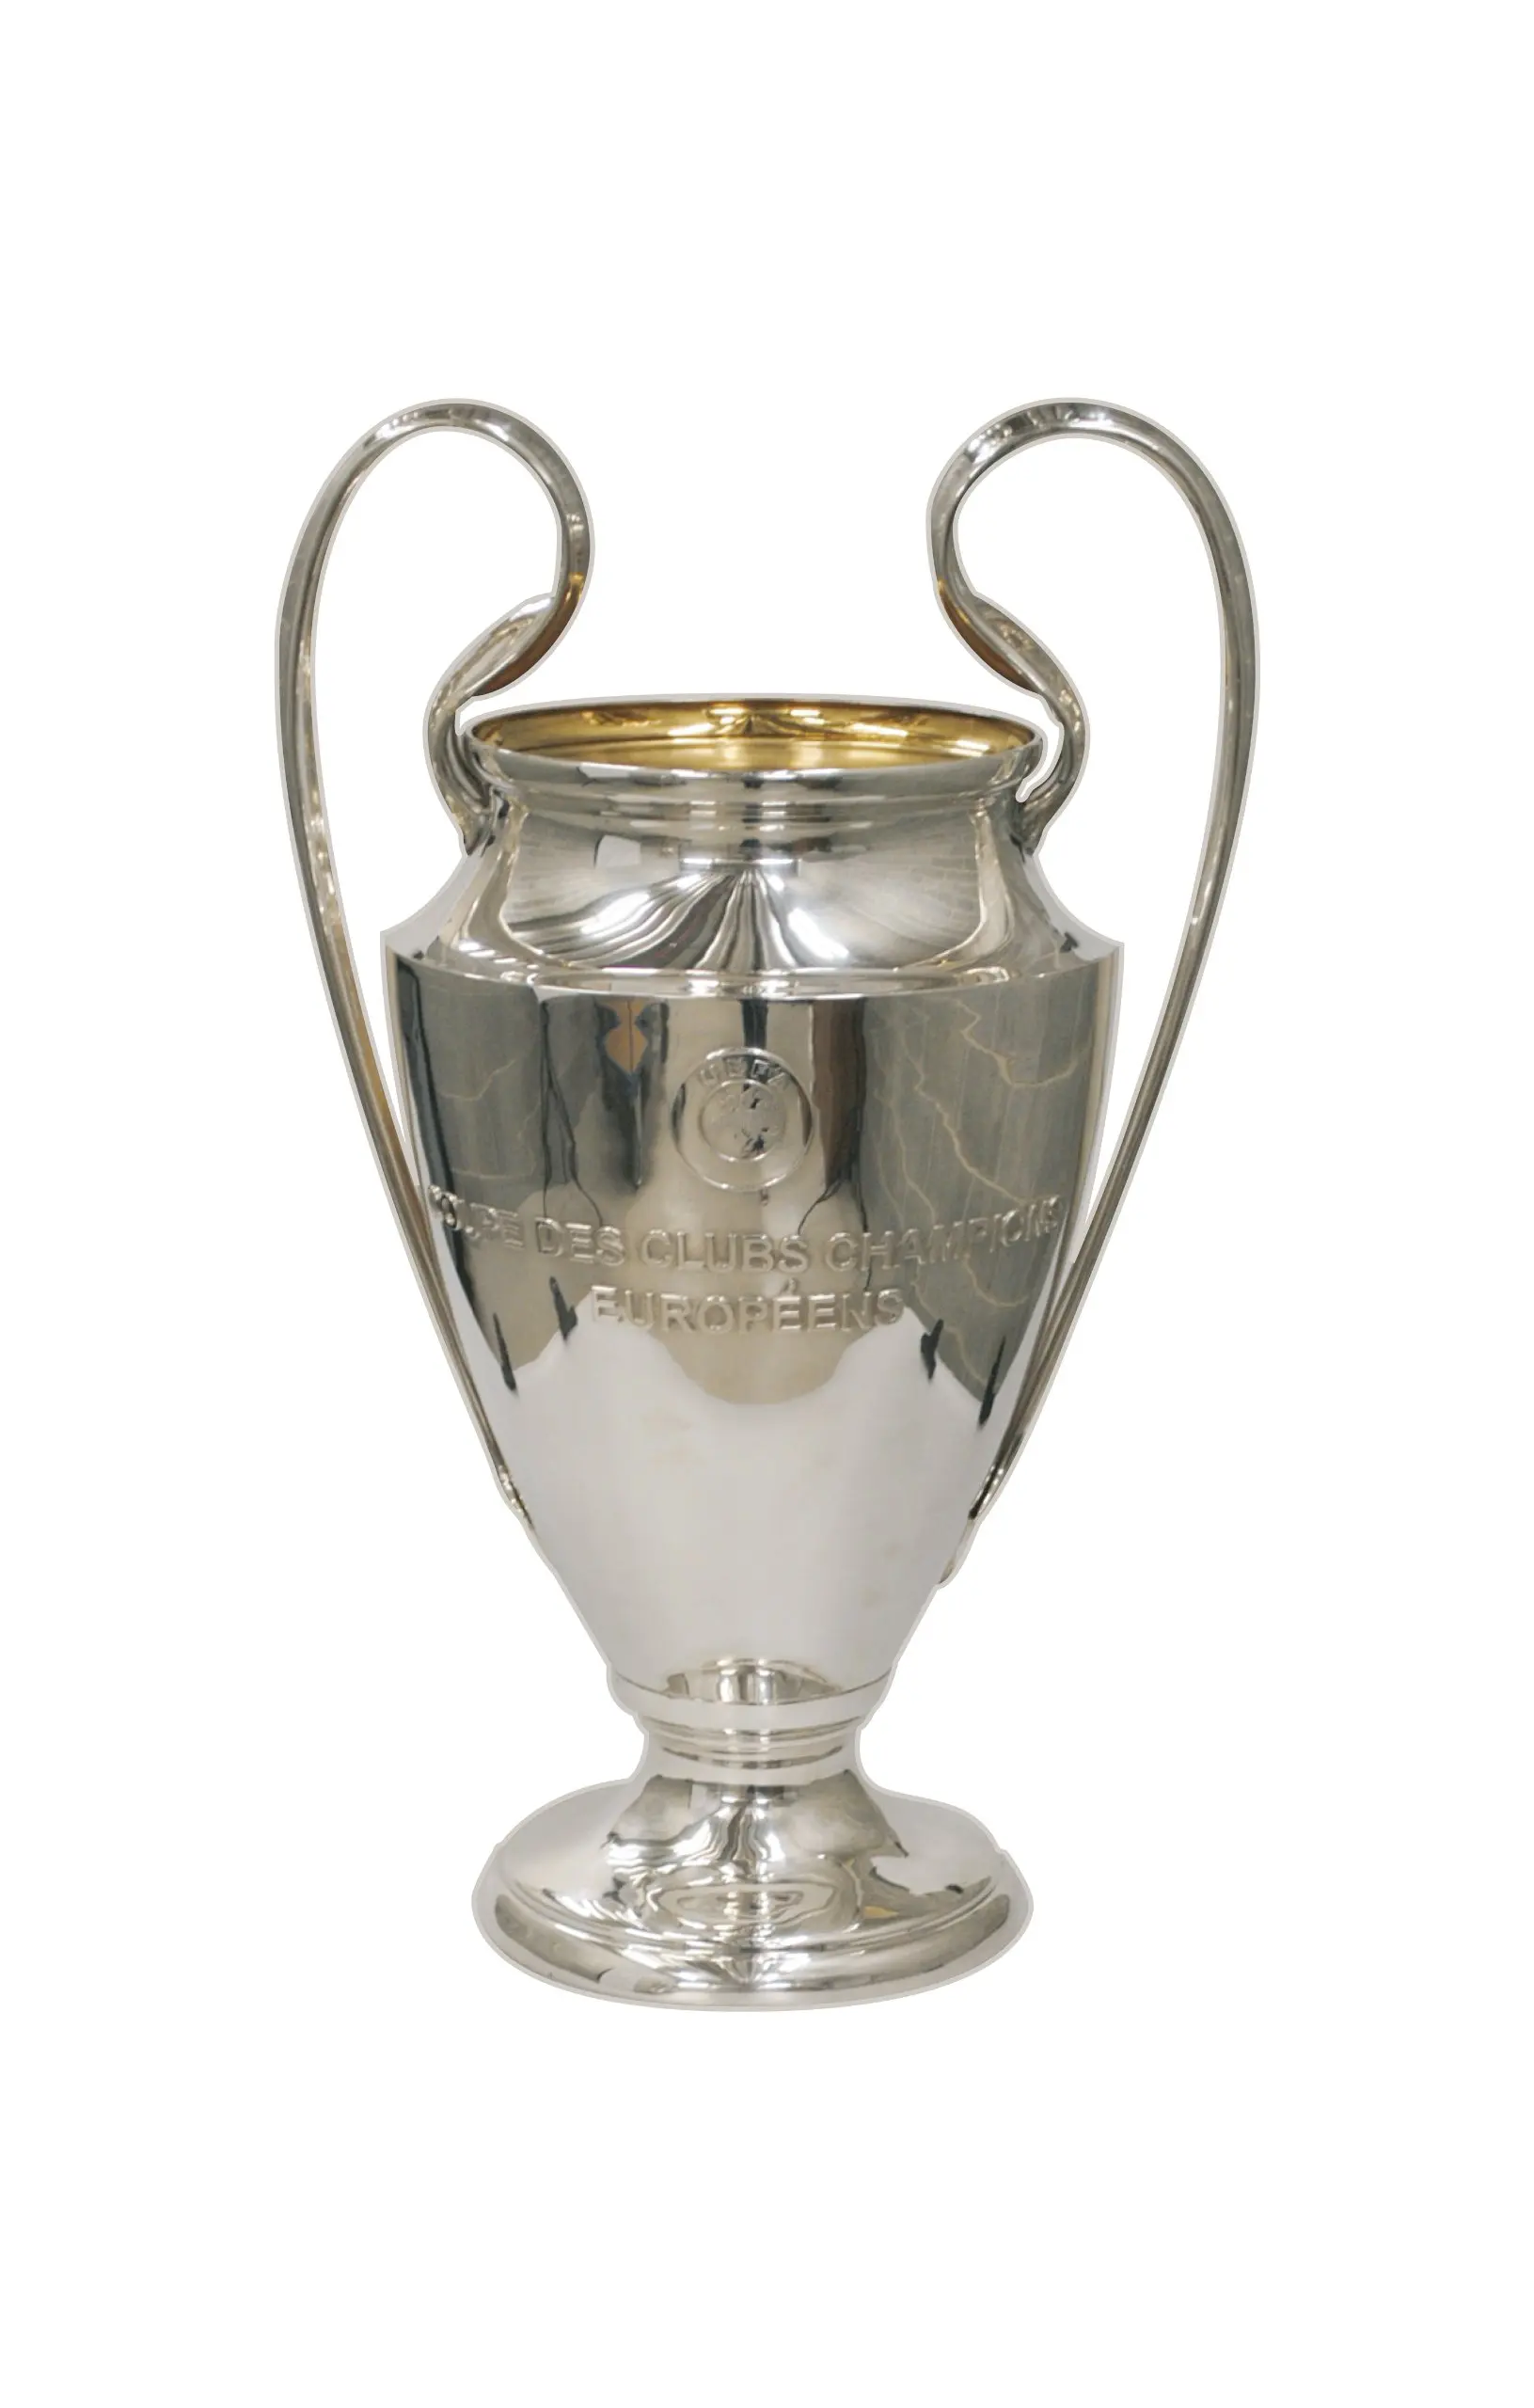 Cheap Champions League Trophy Replica, find Champions ...